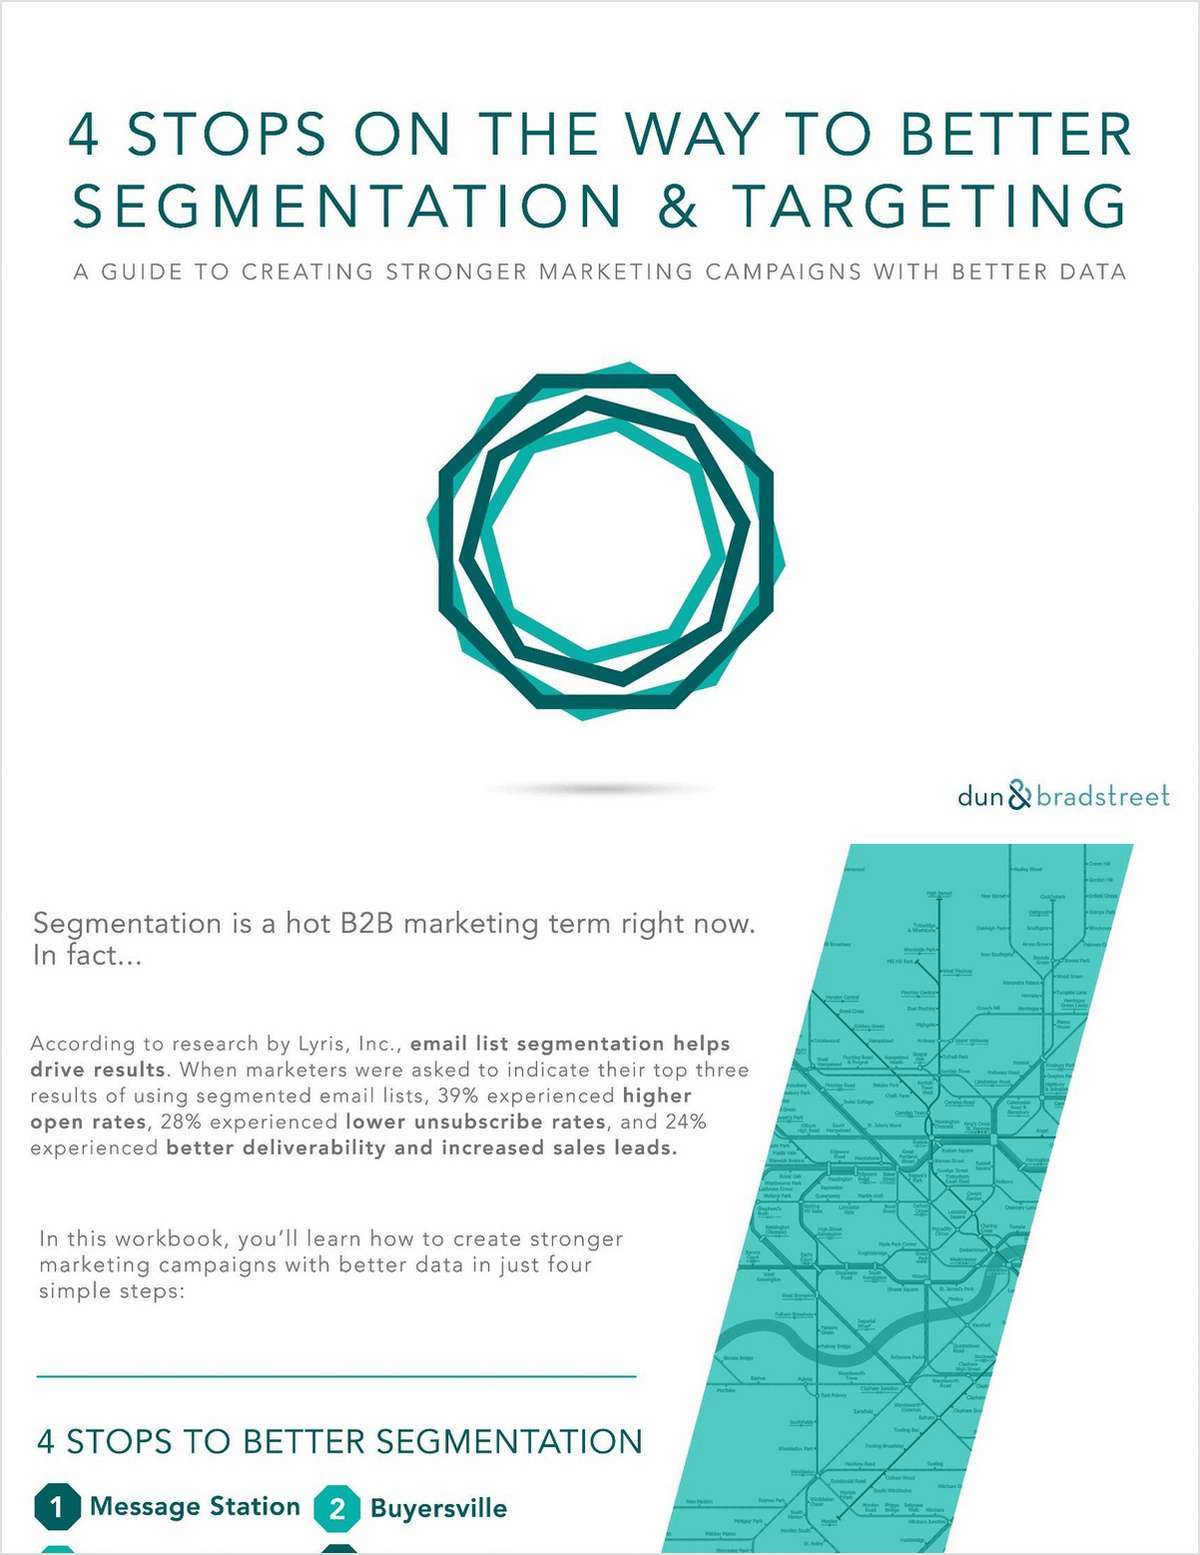 4 'Stops' on the Way to Better Segmentation & Targeting